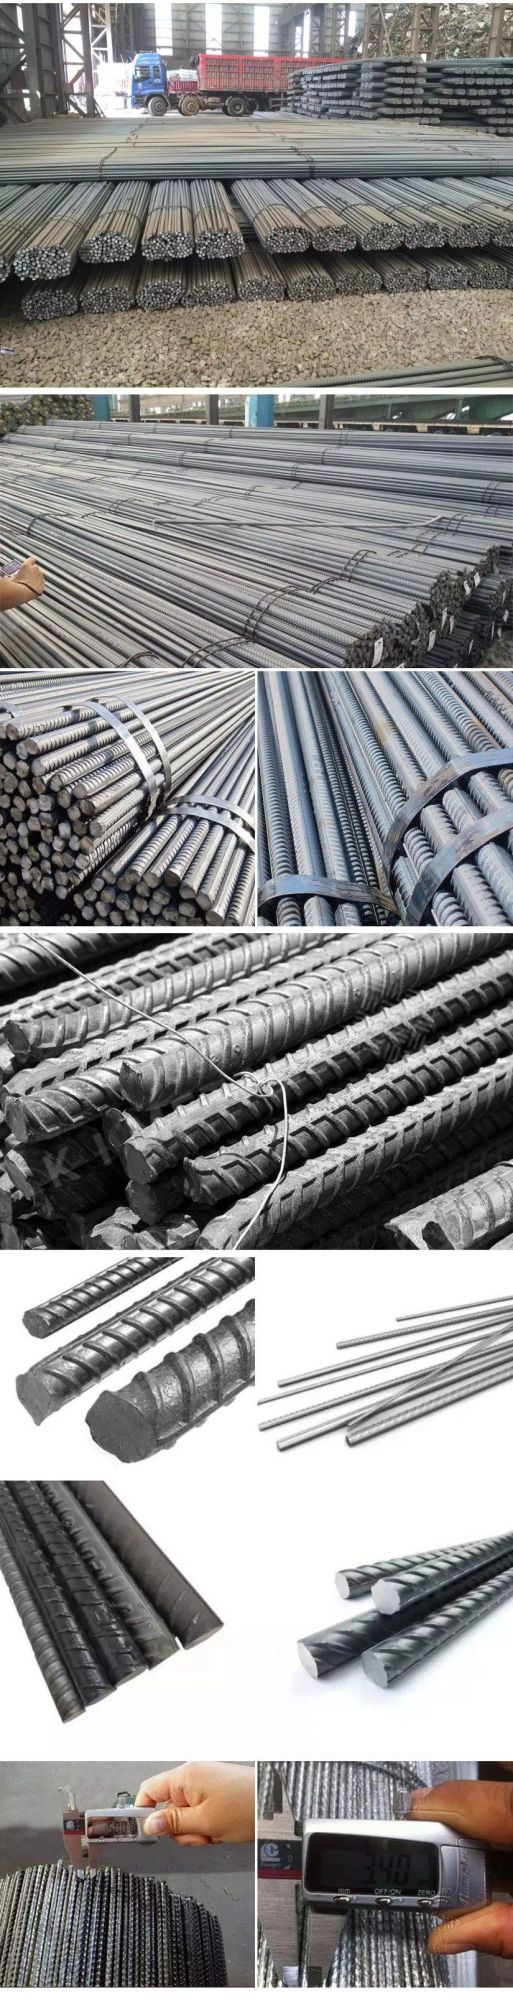 ASTM A615 Types of Steel Bars 10 mm Tmt Bar Price